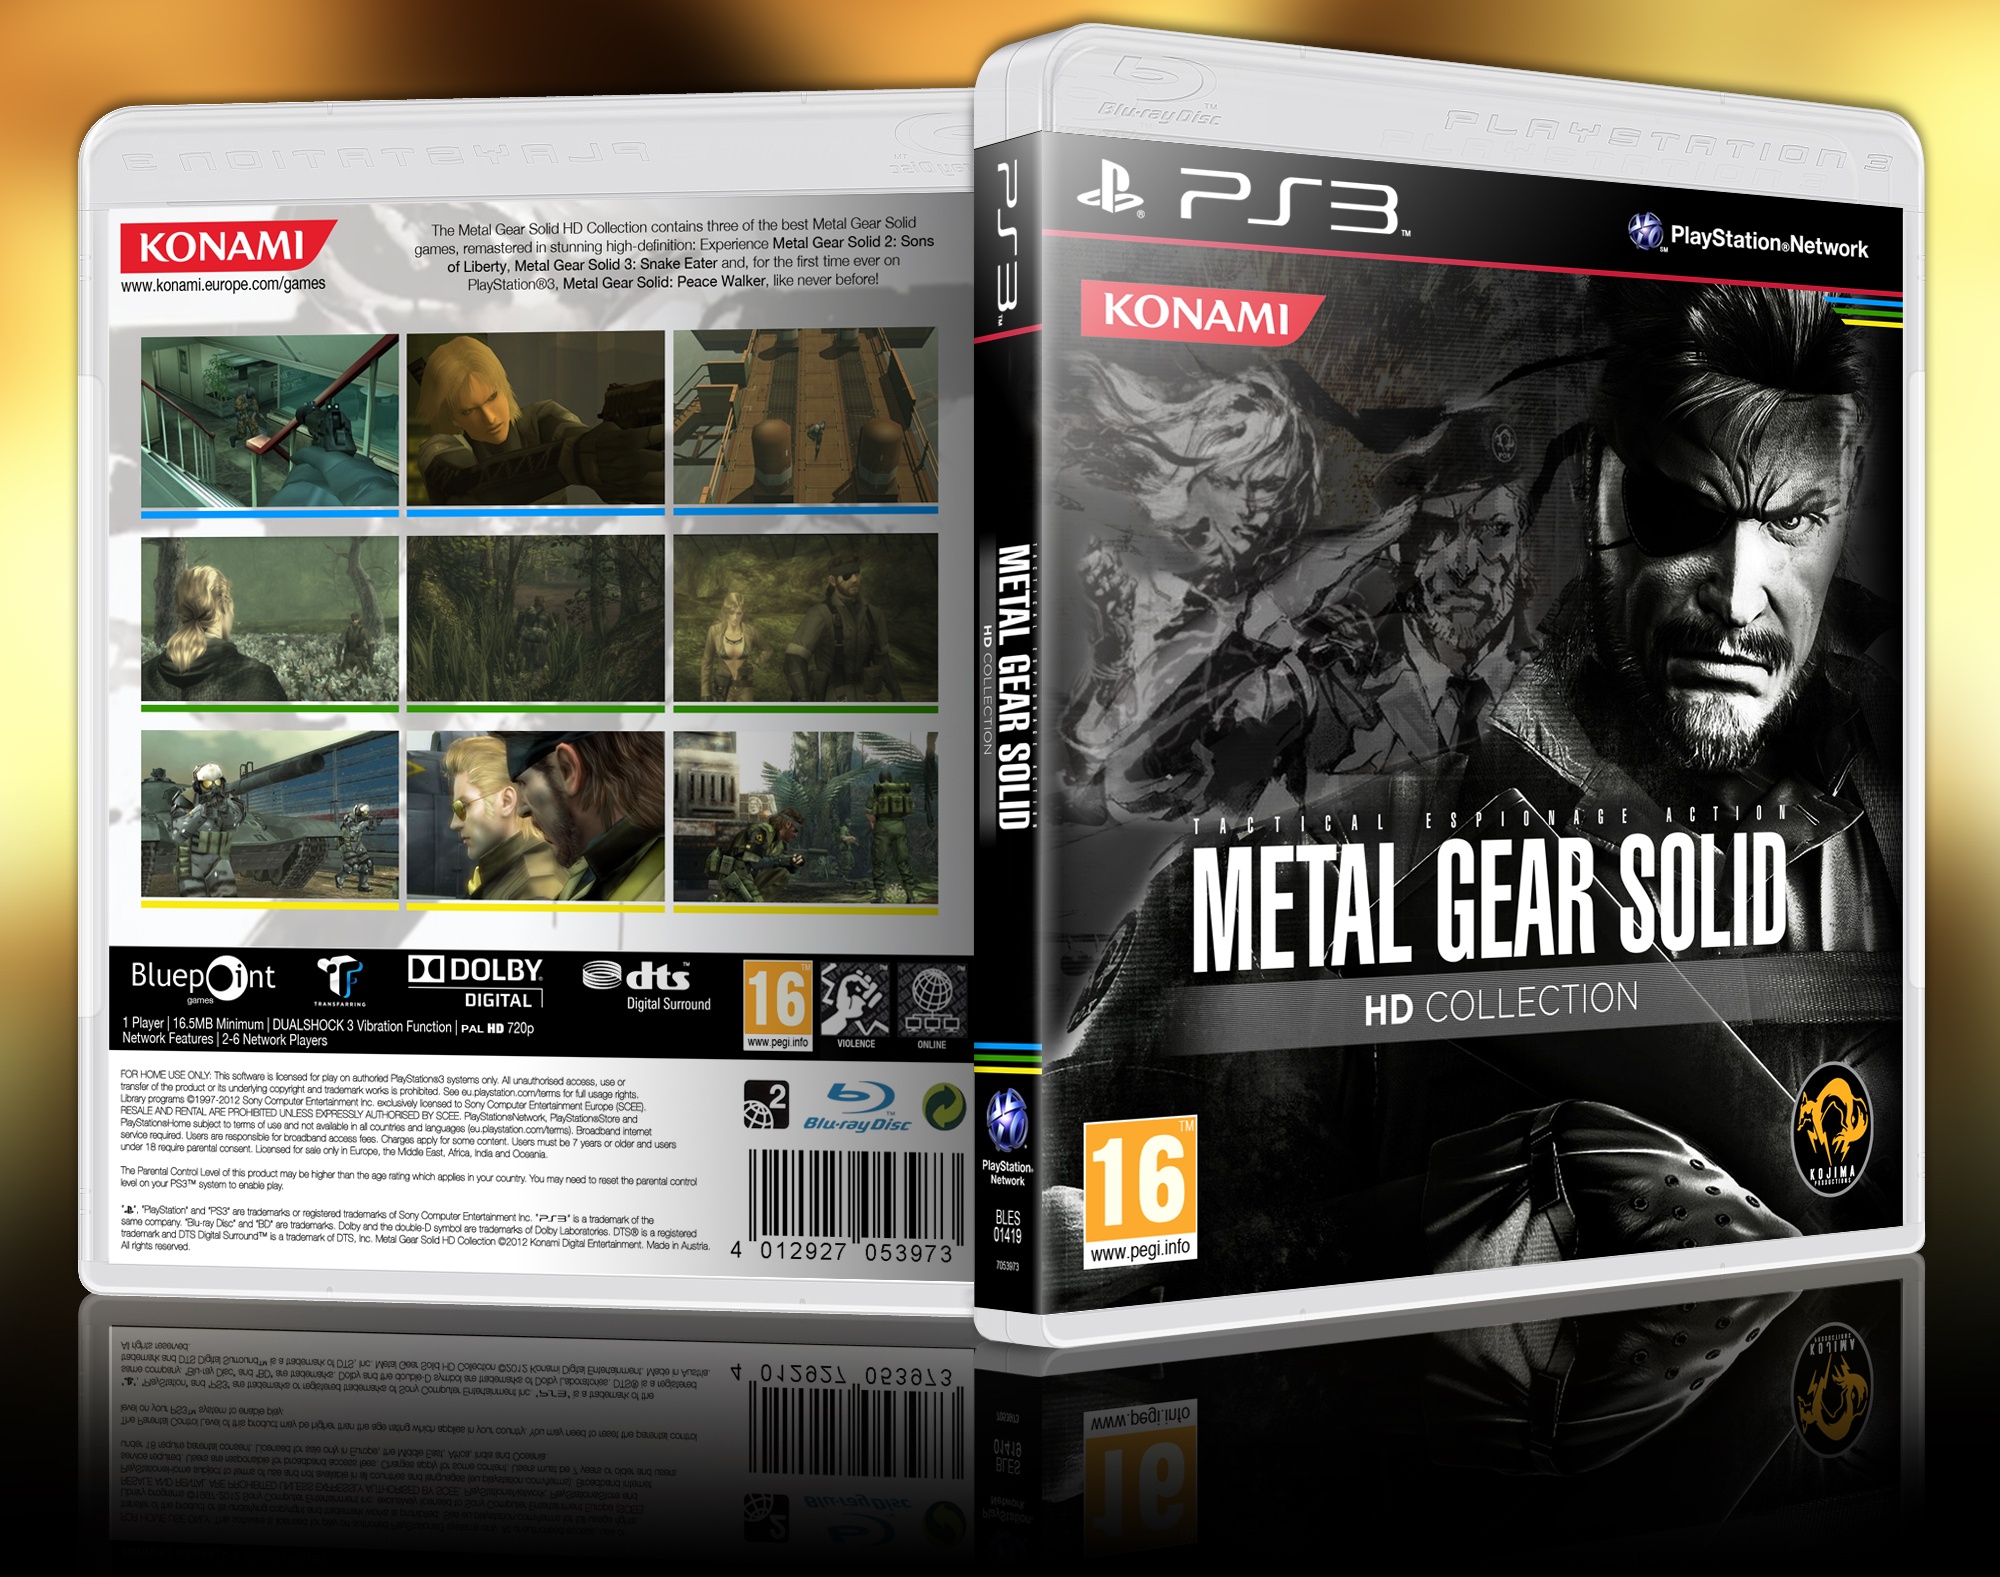 Mgs 3 master collection. Metal Gear Solid Sony PLAYSTATION 3. MGS 4 ps3. Metal Gear 1 ps3.